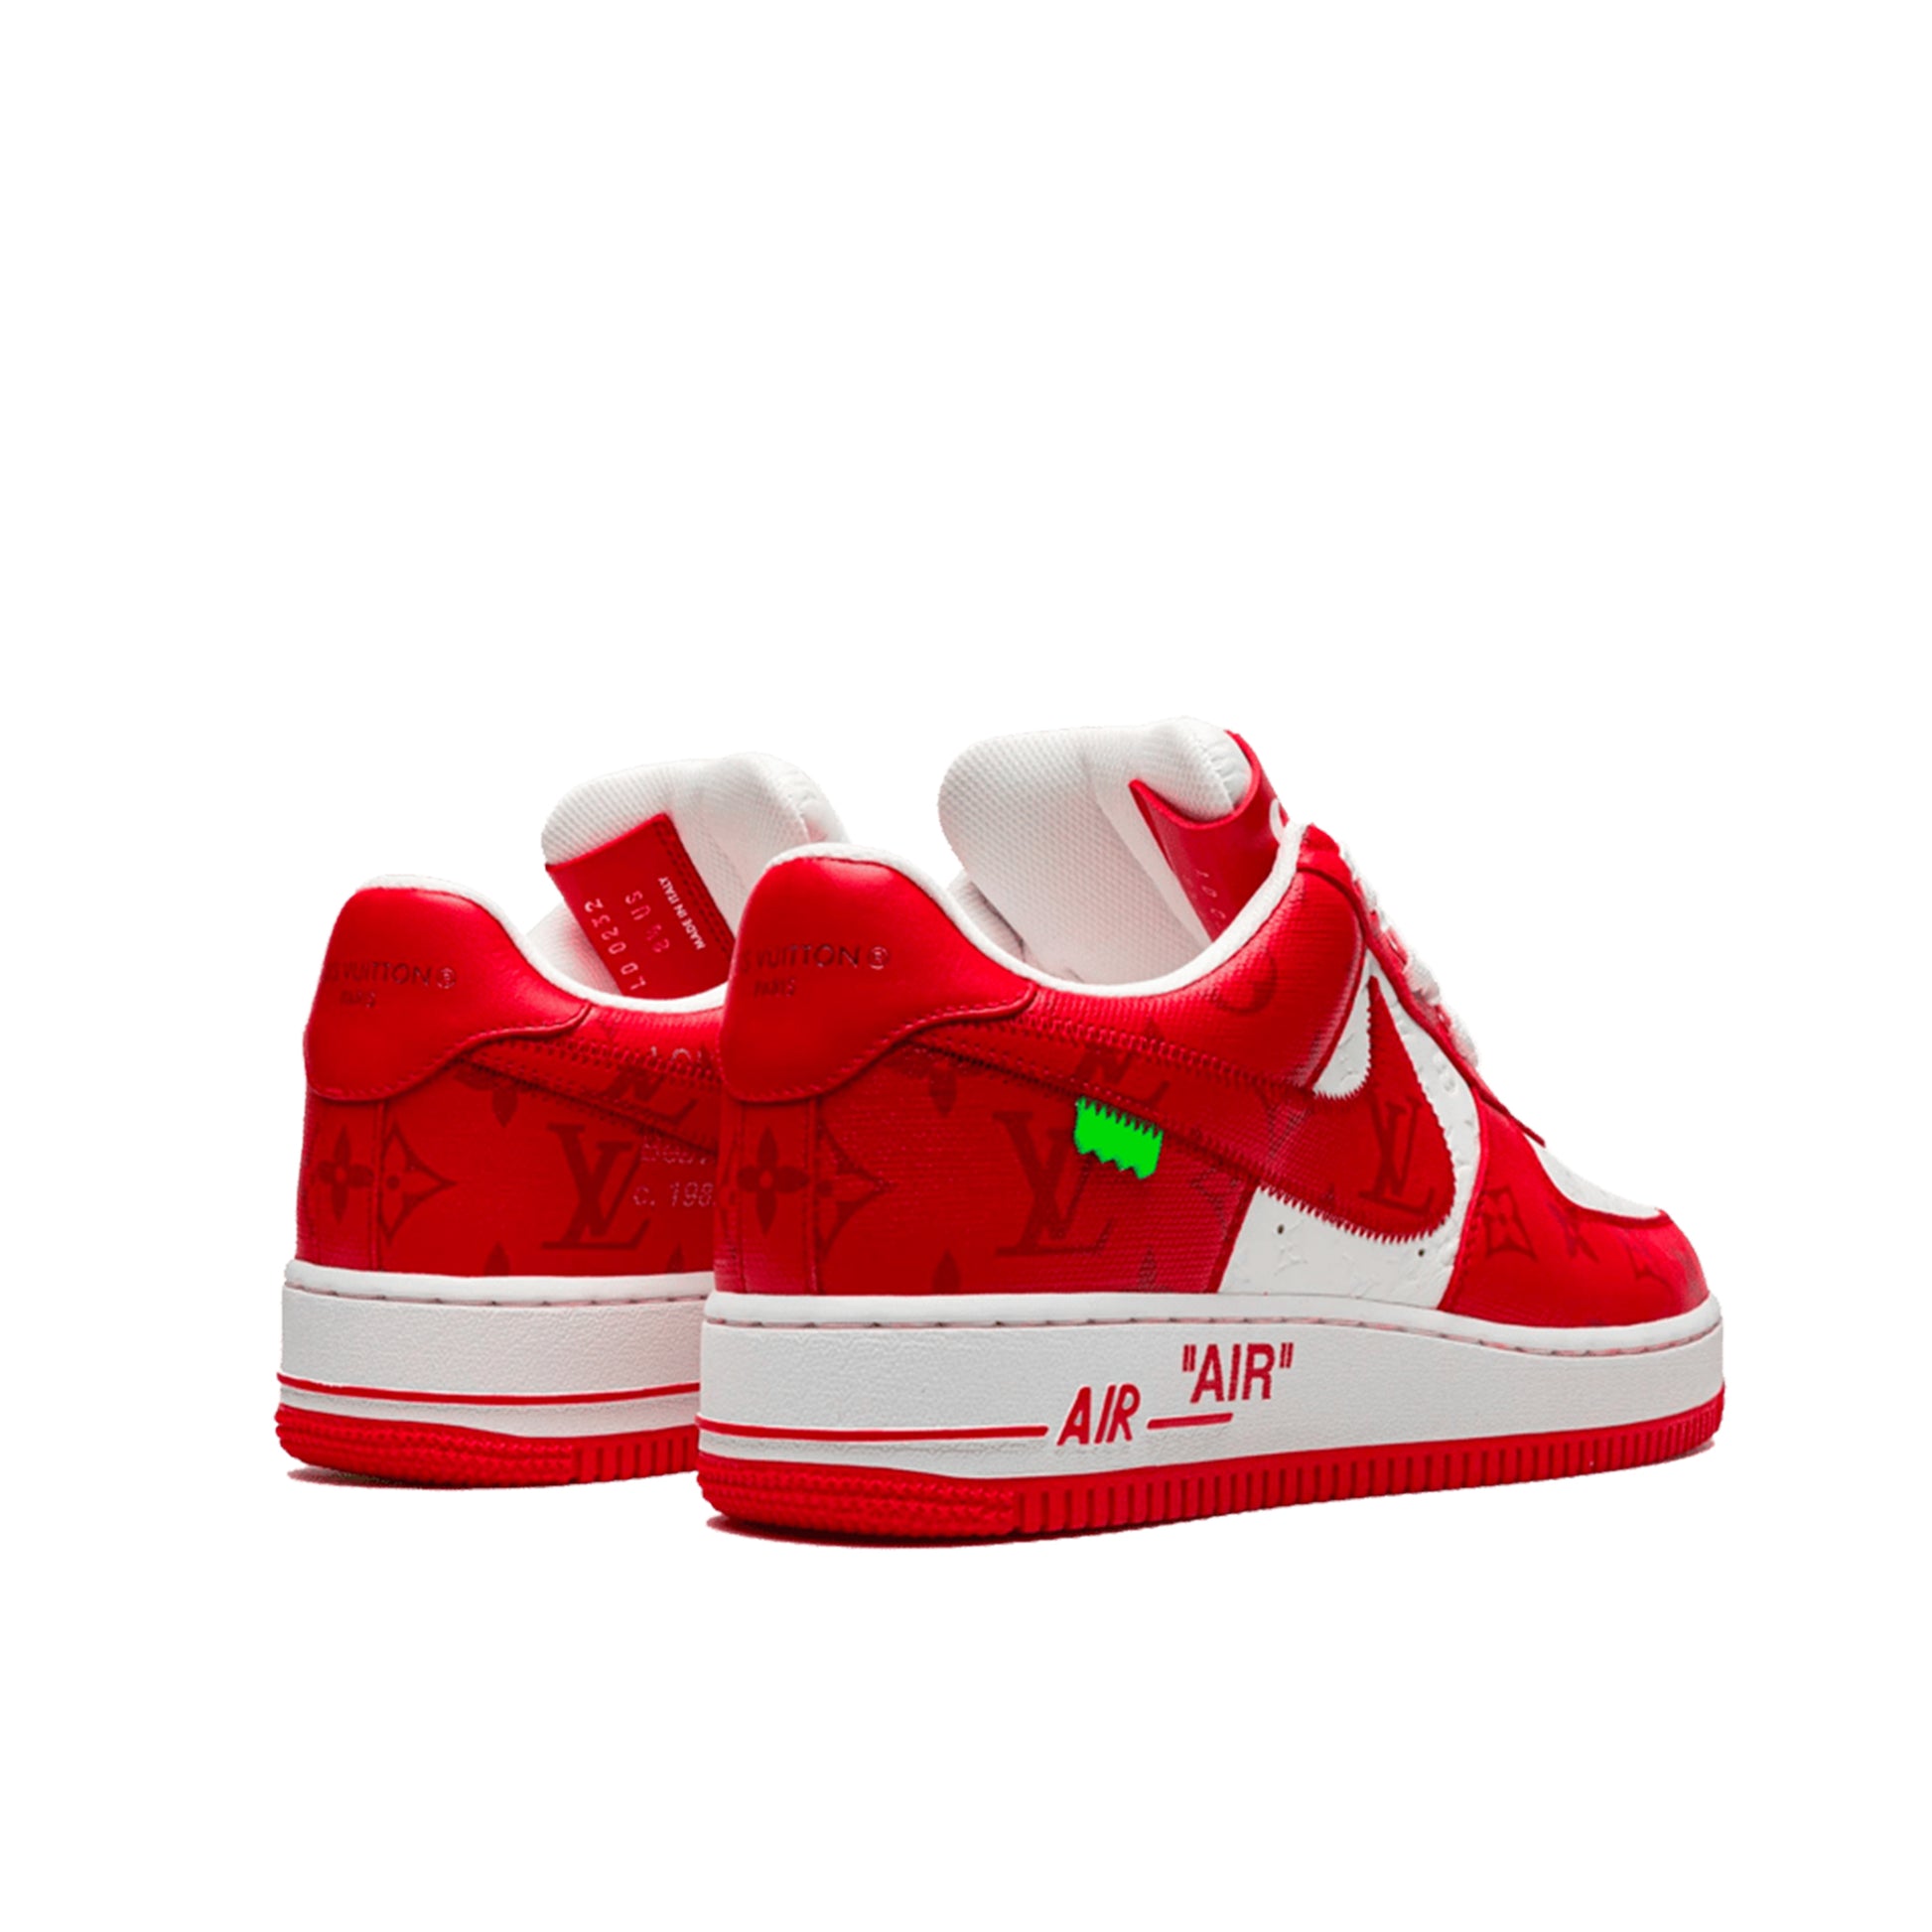 Nike Louis Vuitton Air Force 1 Low virgil Abloh in Red